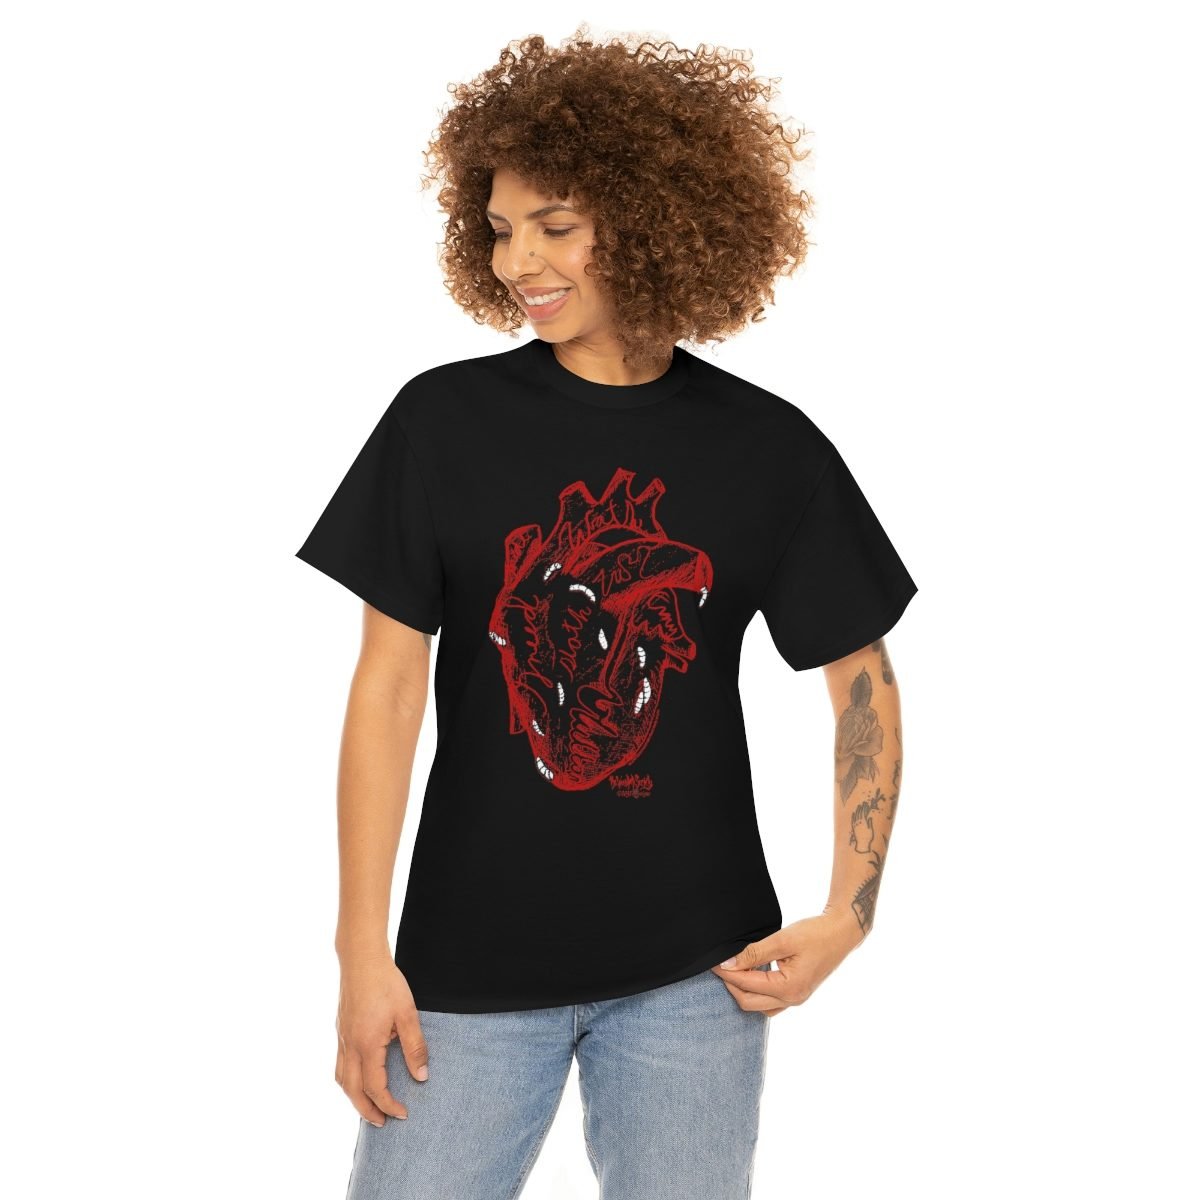 The Sinful Heart by The Wounded Society Short Sleeve Tshirt